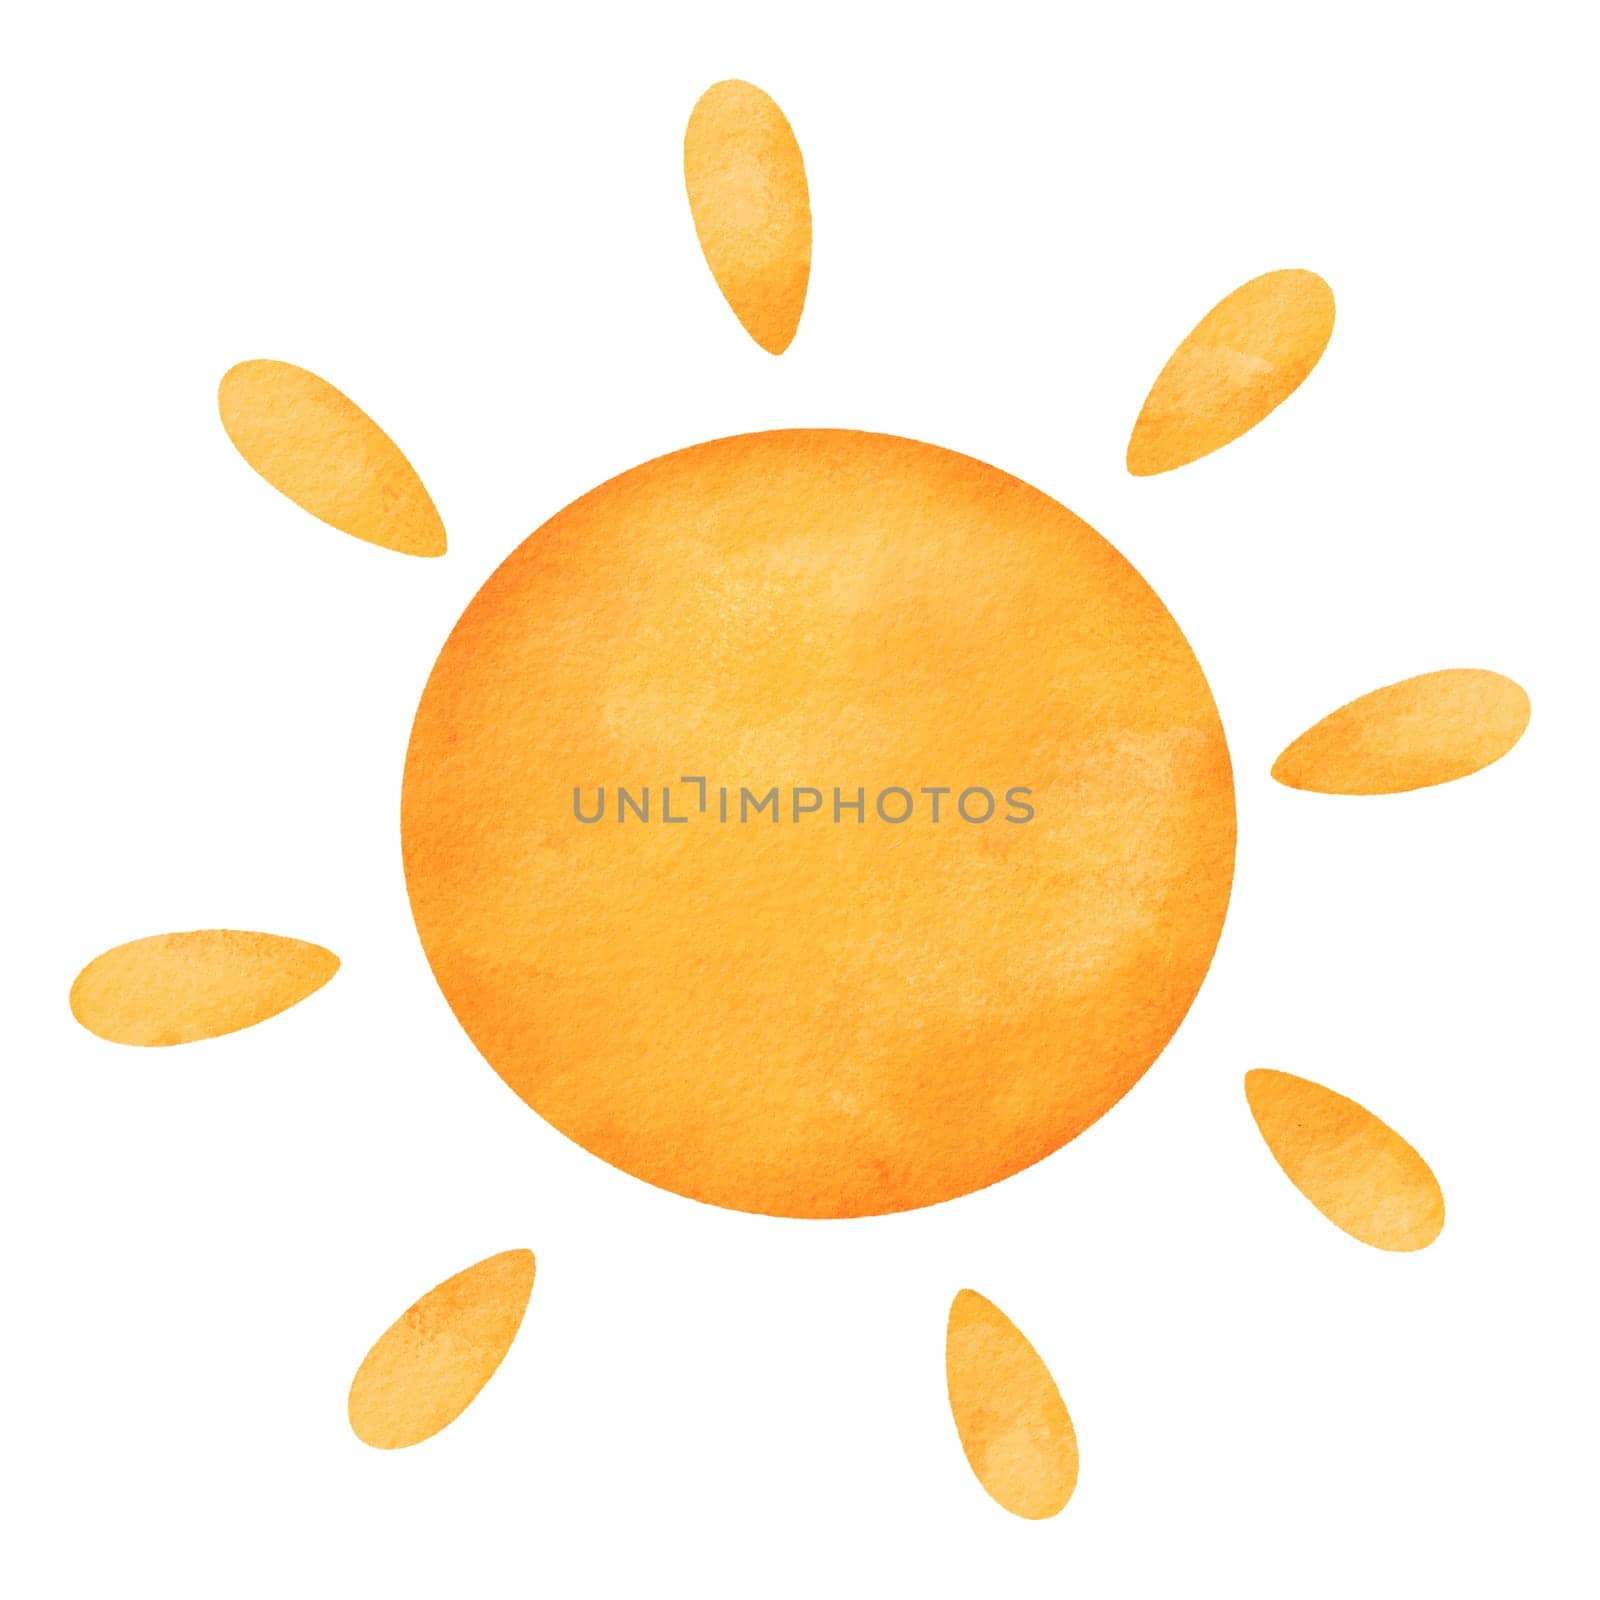 sun with rays. for children's books, greeting cards, and vibrant illustrations. Let the sun's lively character shine through in your creative projects. watercolor illustration in a cartoon style.